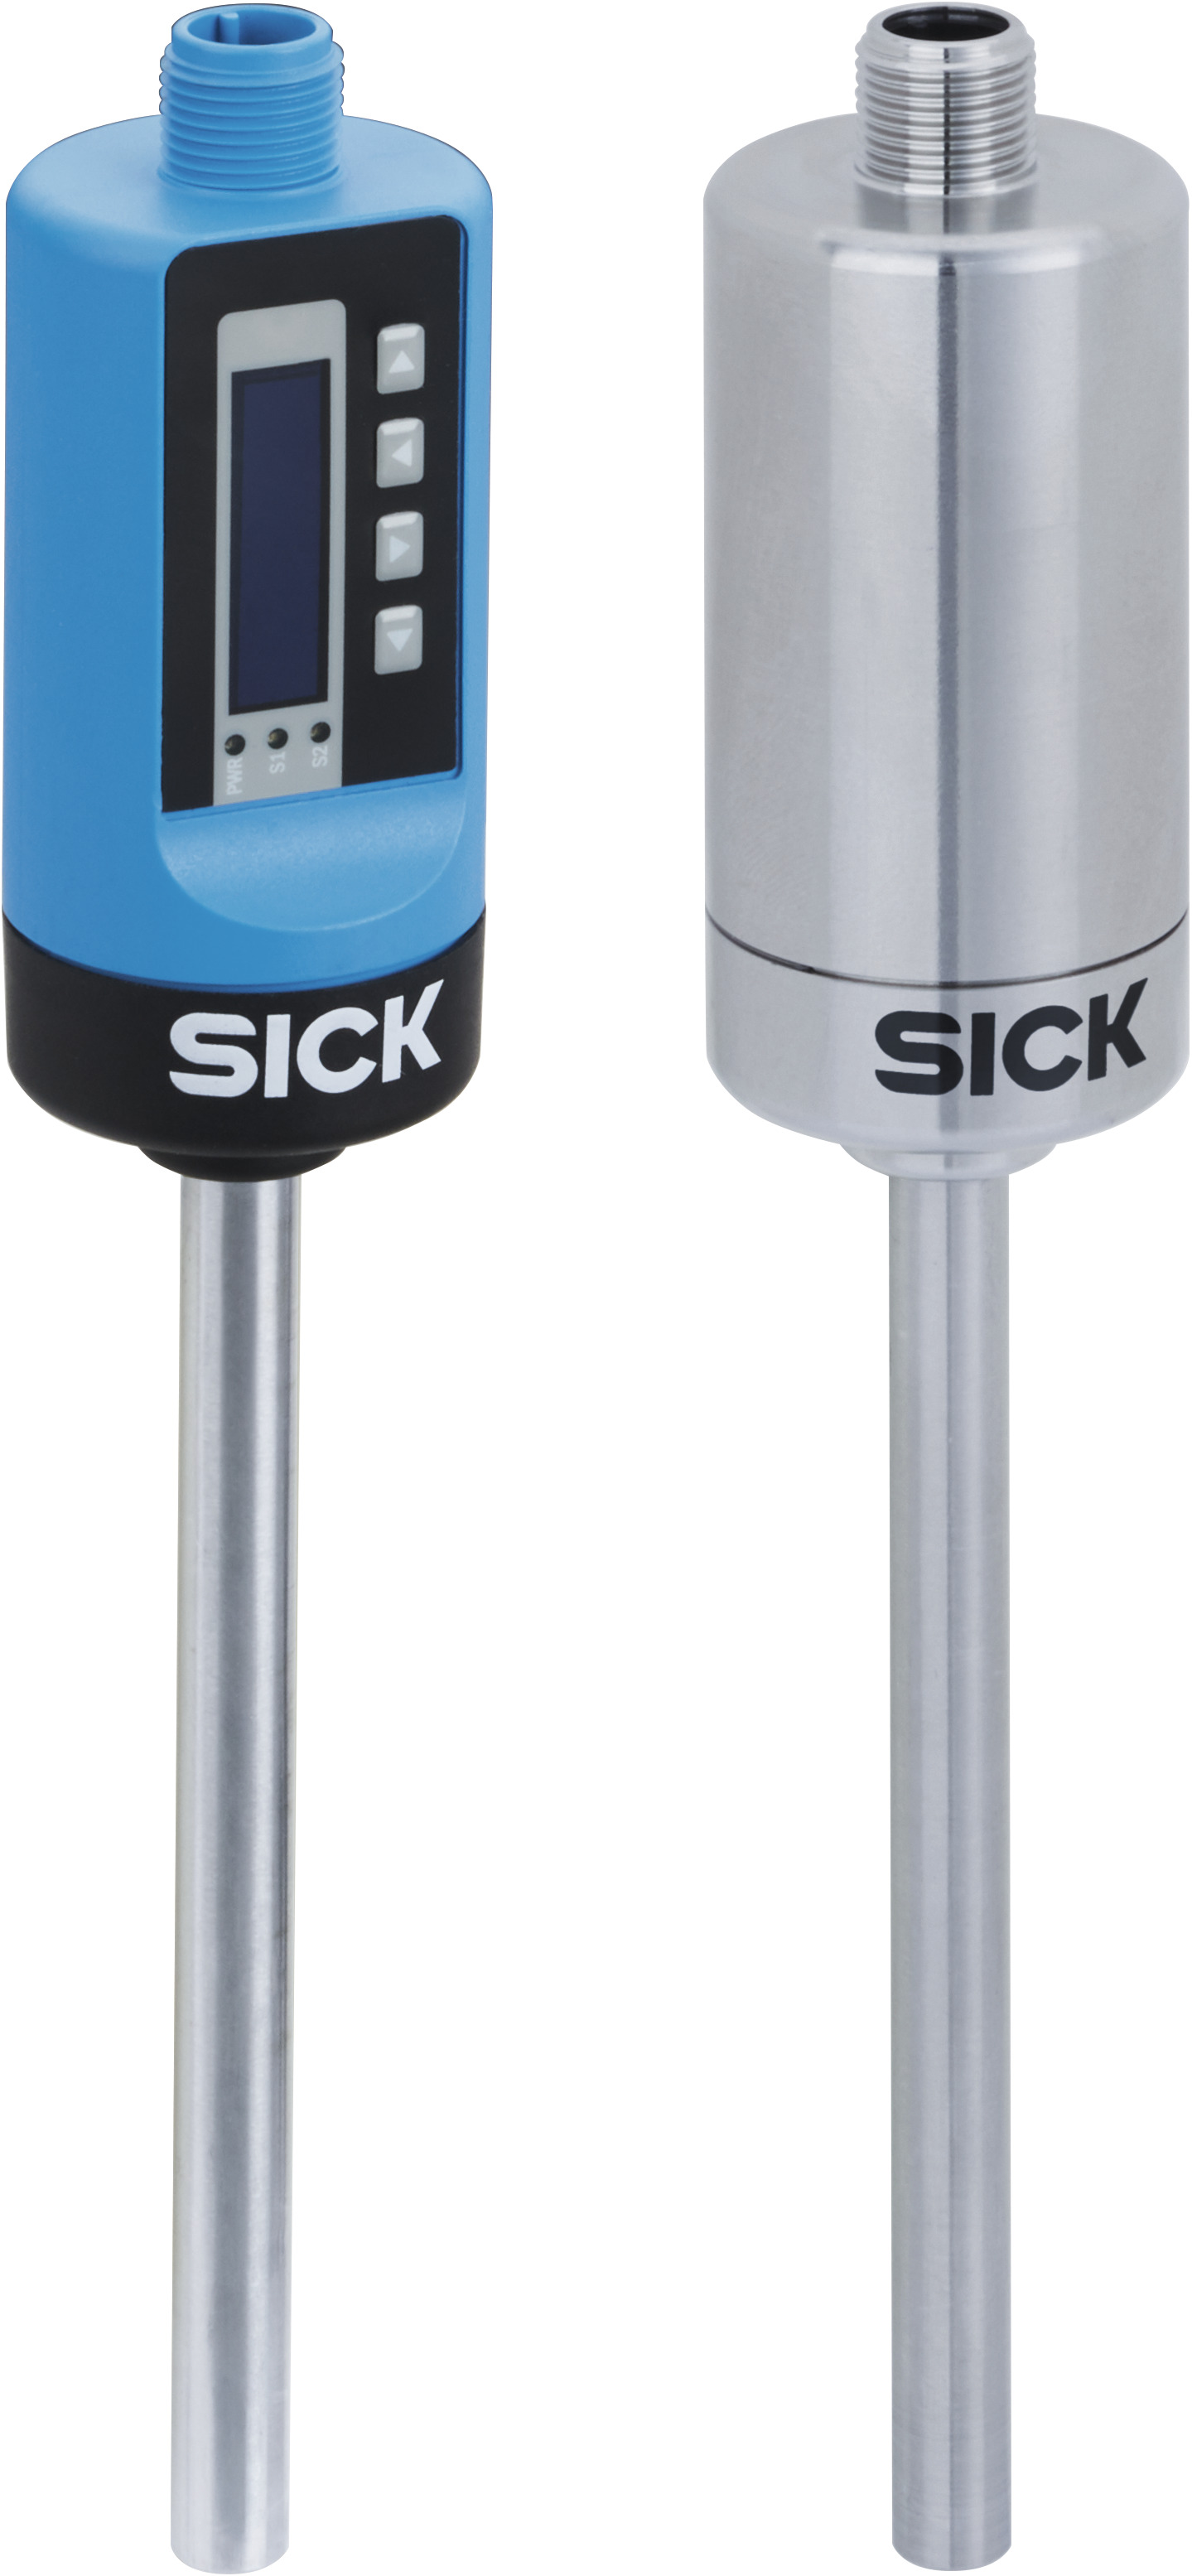 The SICK T-Easic is designed for use with water or oil-based liquids.